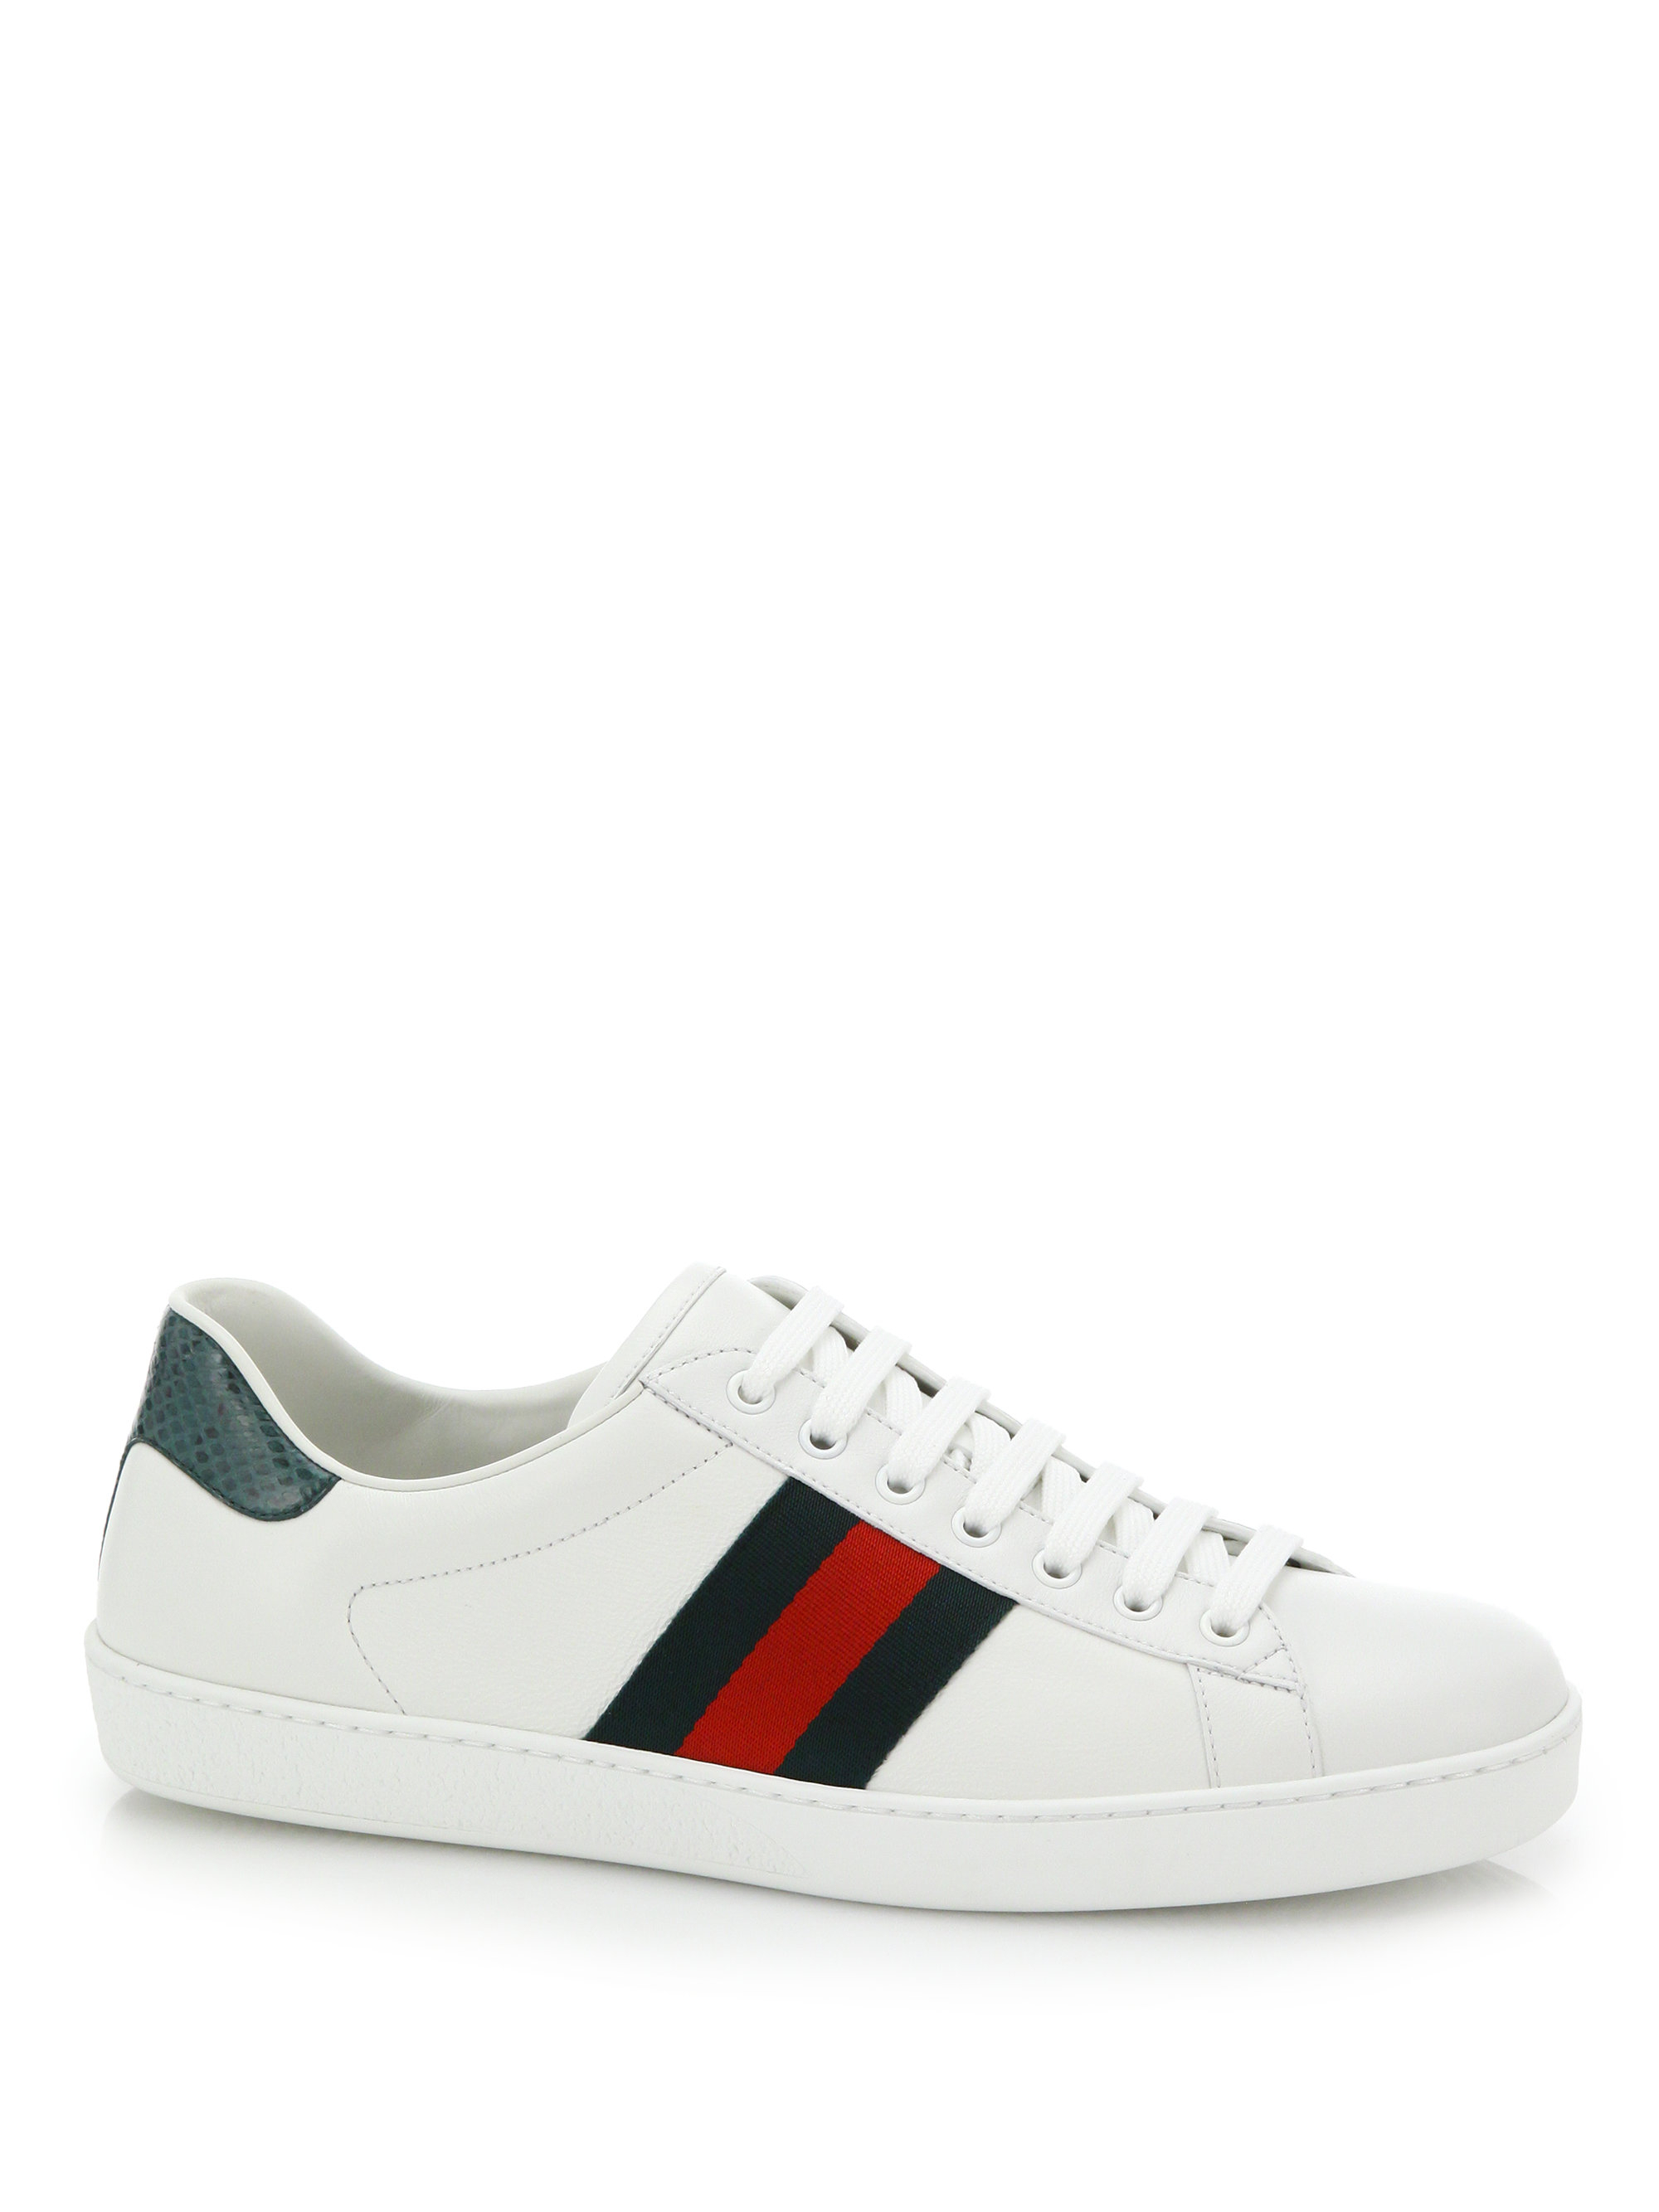 Gucci Sneakers Men On Sale For Men - How To Meet Russian